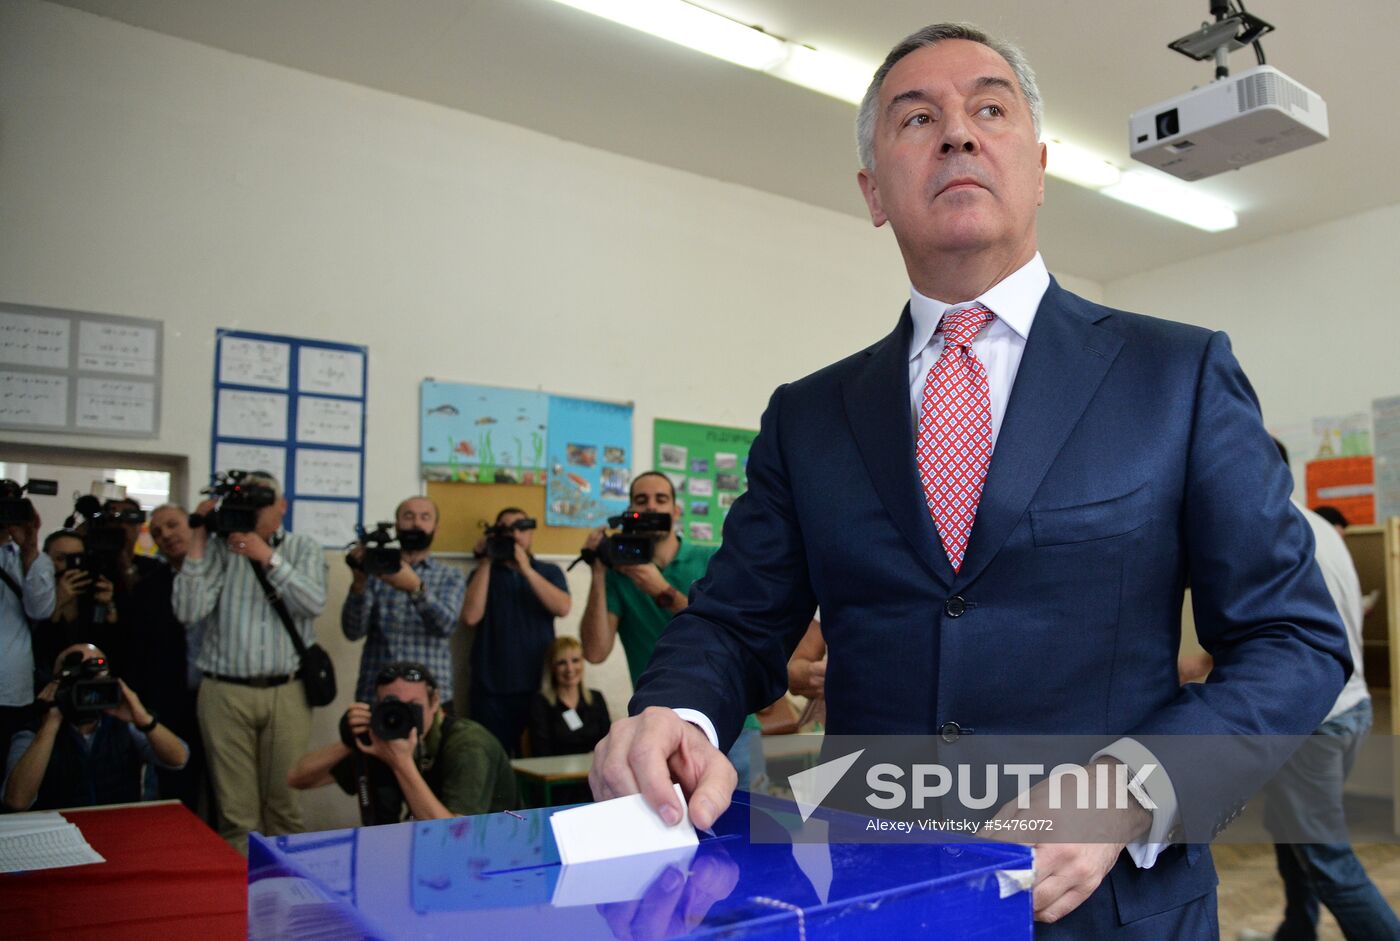 Presidential election in Montenegro